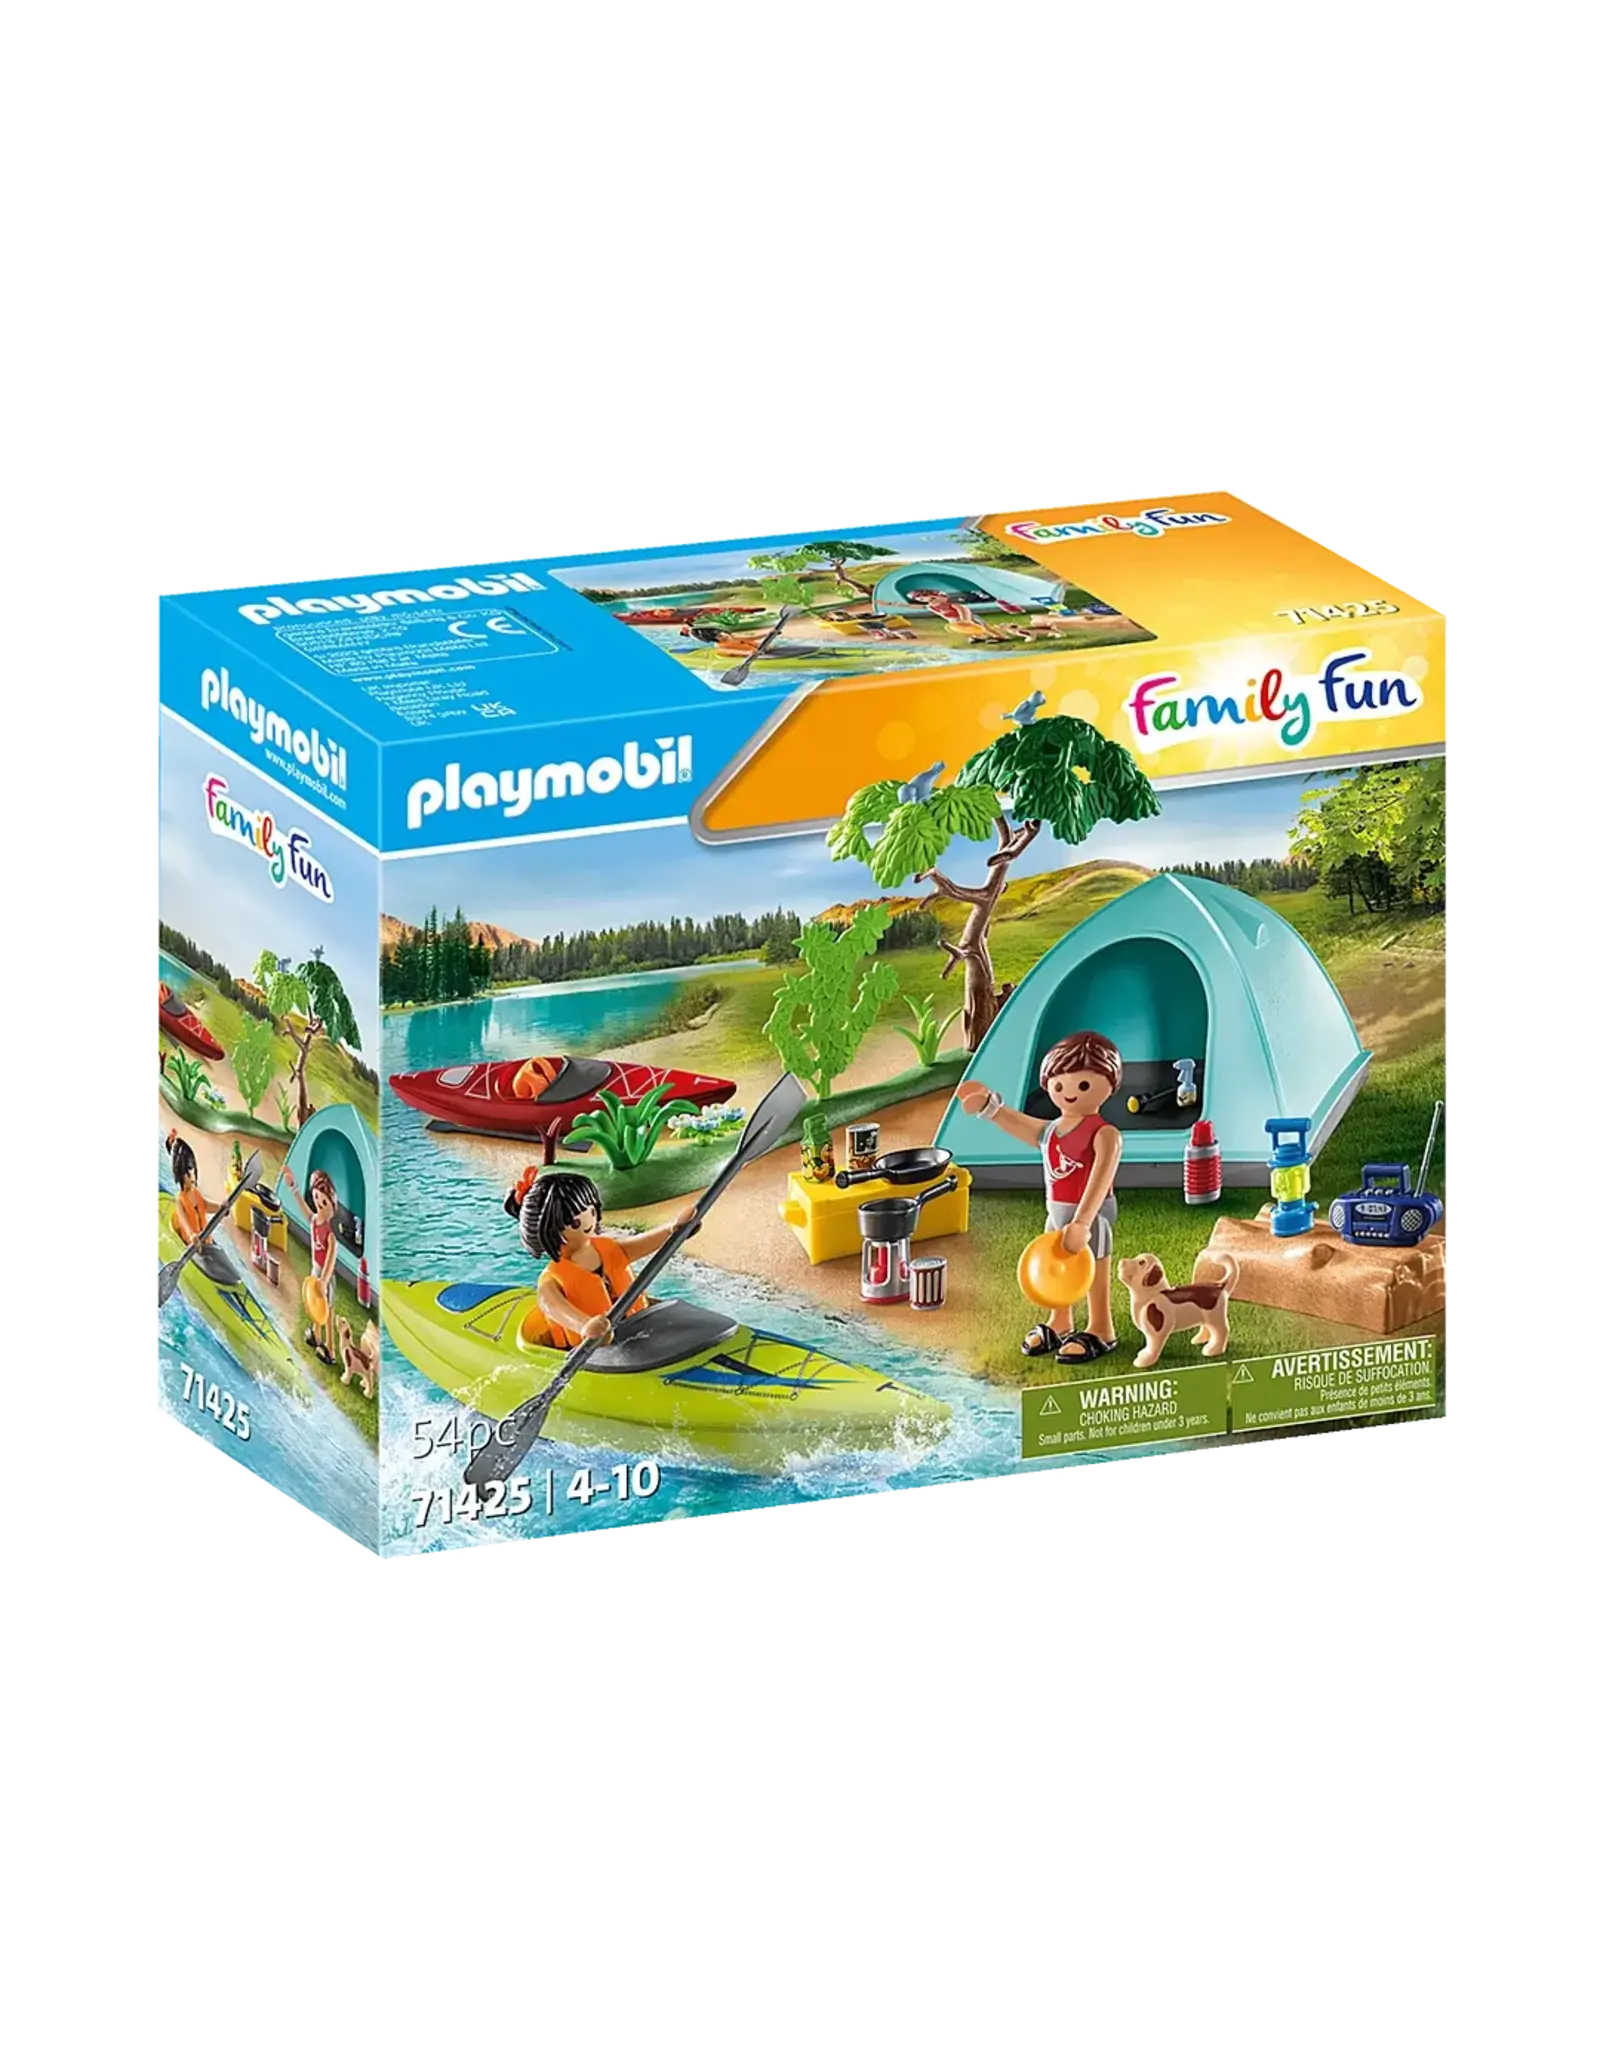 Playmobil Campsite with Campfire